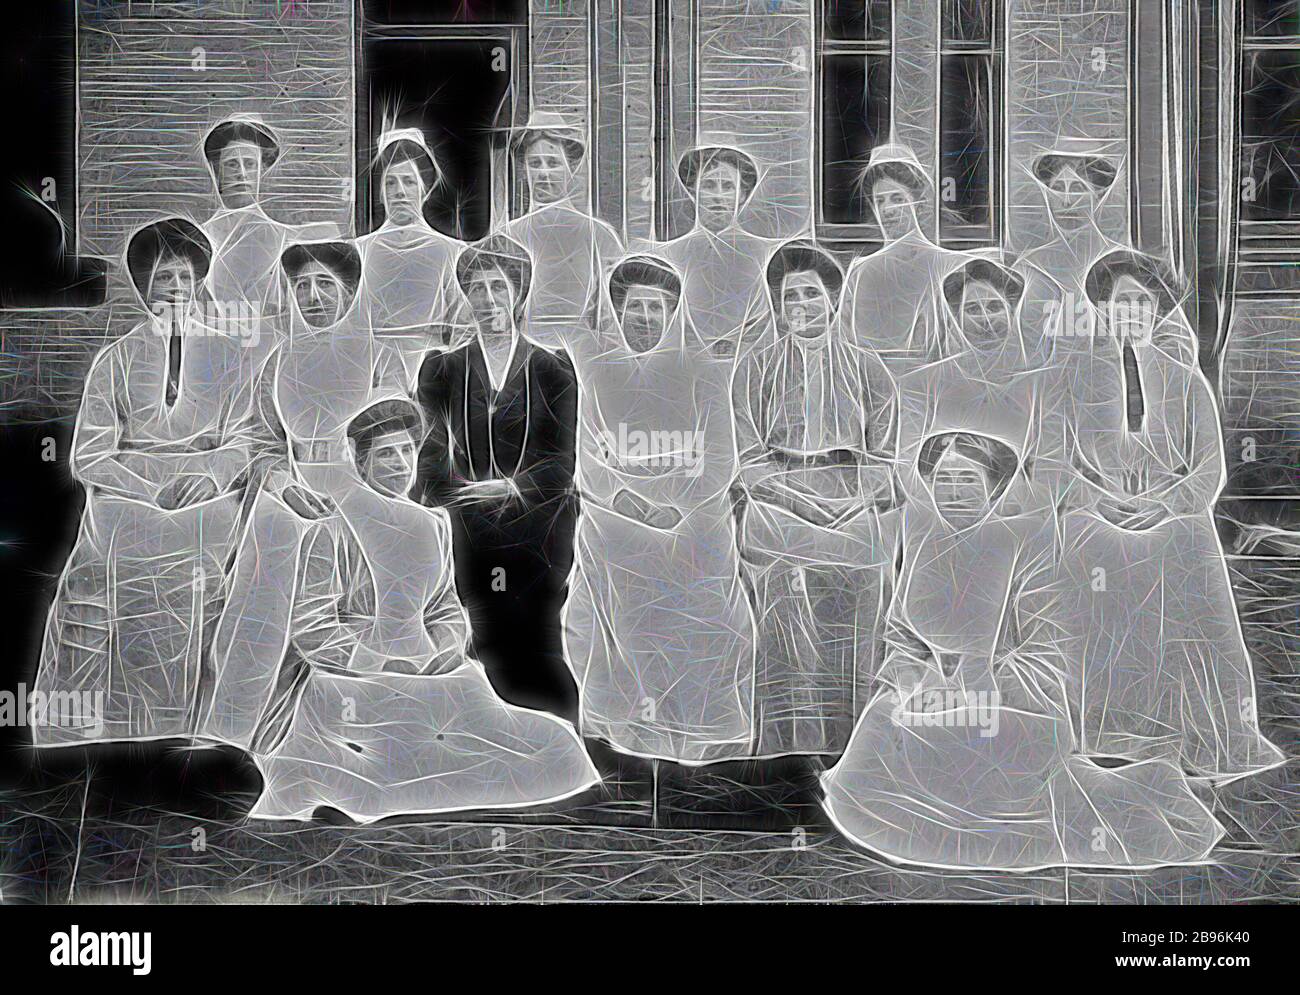 Negative - Melbourne, Victoria, circa 1910, Staff at the Queen Victoria Hospital., Reimagined by Gibon, design of warm cheerful glowing of brightness and light rays radiance. Classic art reinvented with a modern twist. Photography inspired by futurism, embracing dynamic energy of modern technology, movement, speed and revolutionize culture. Stock Photo